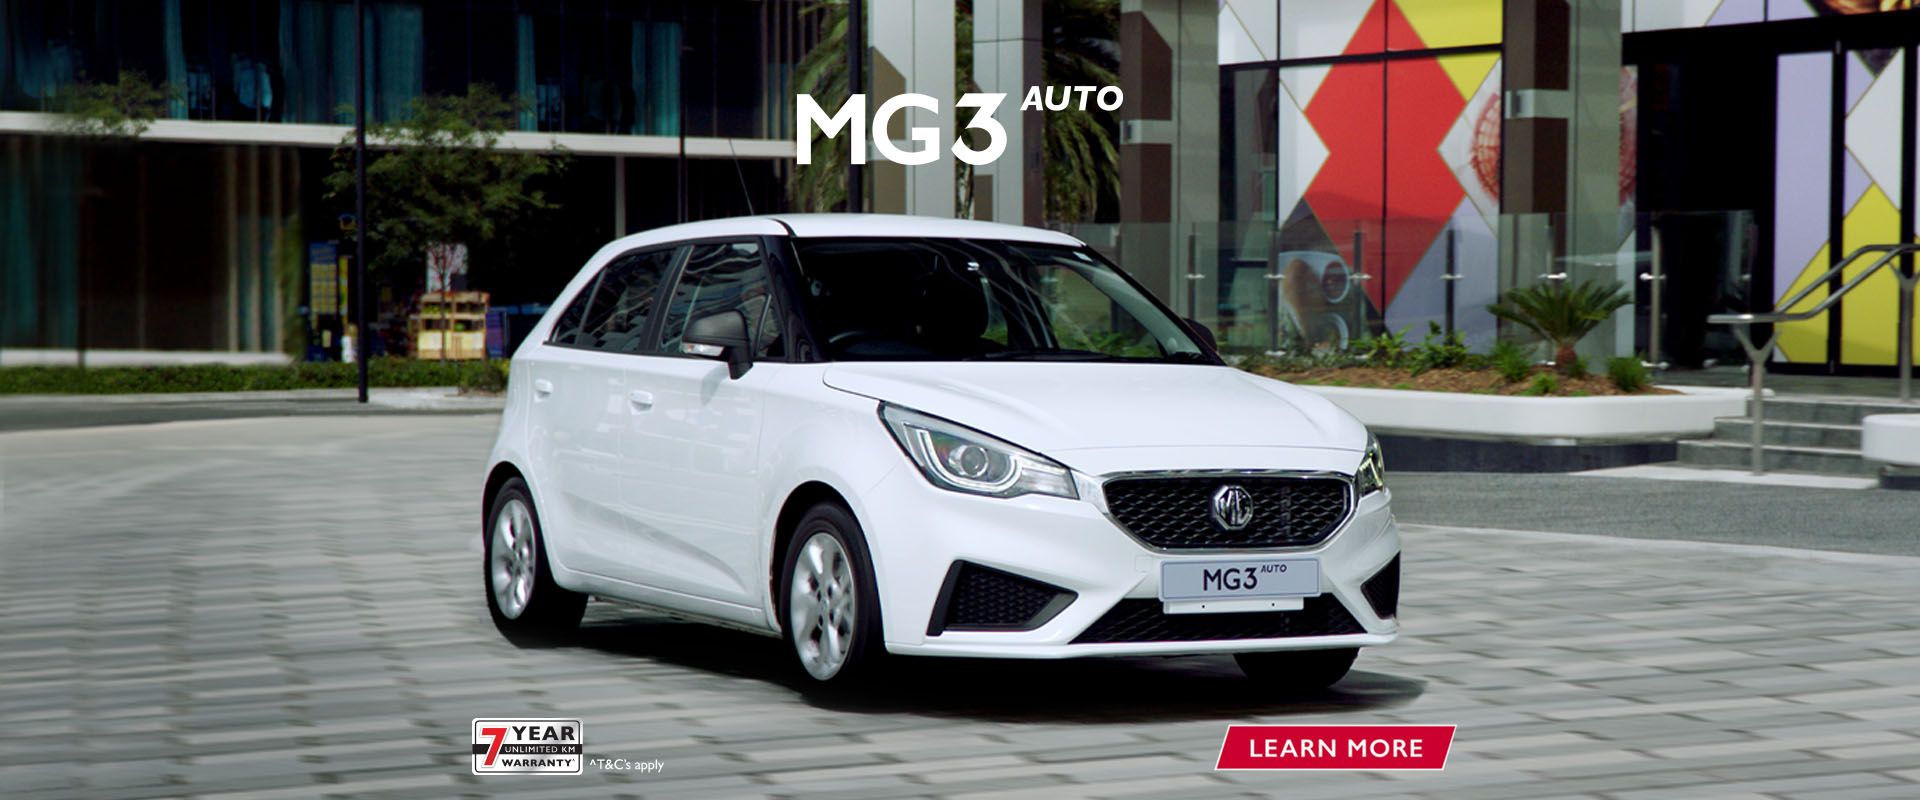 MG3 Drive your style